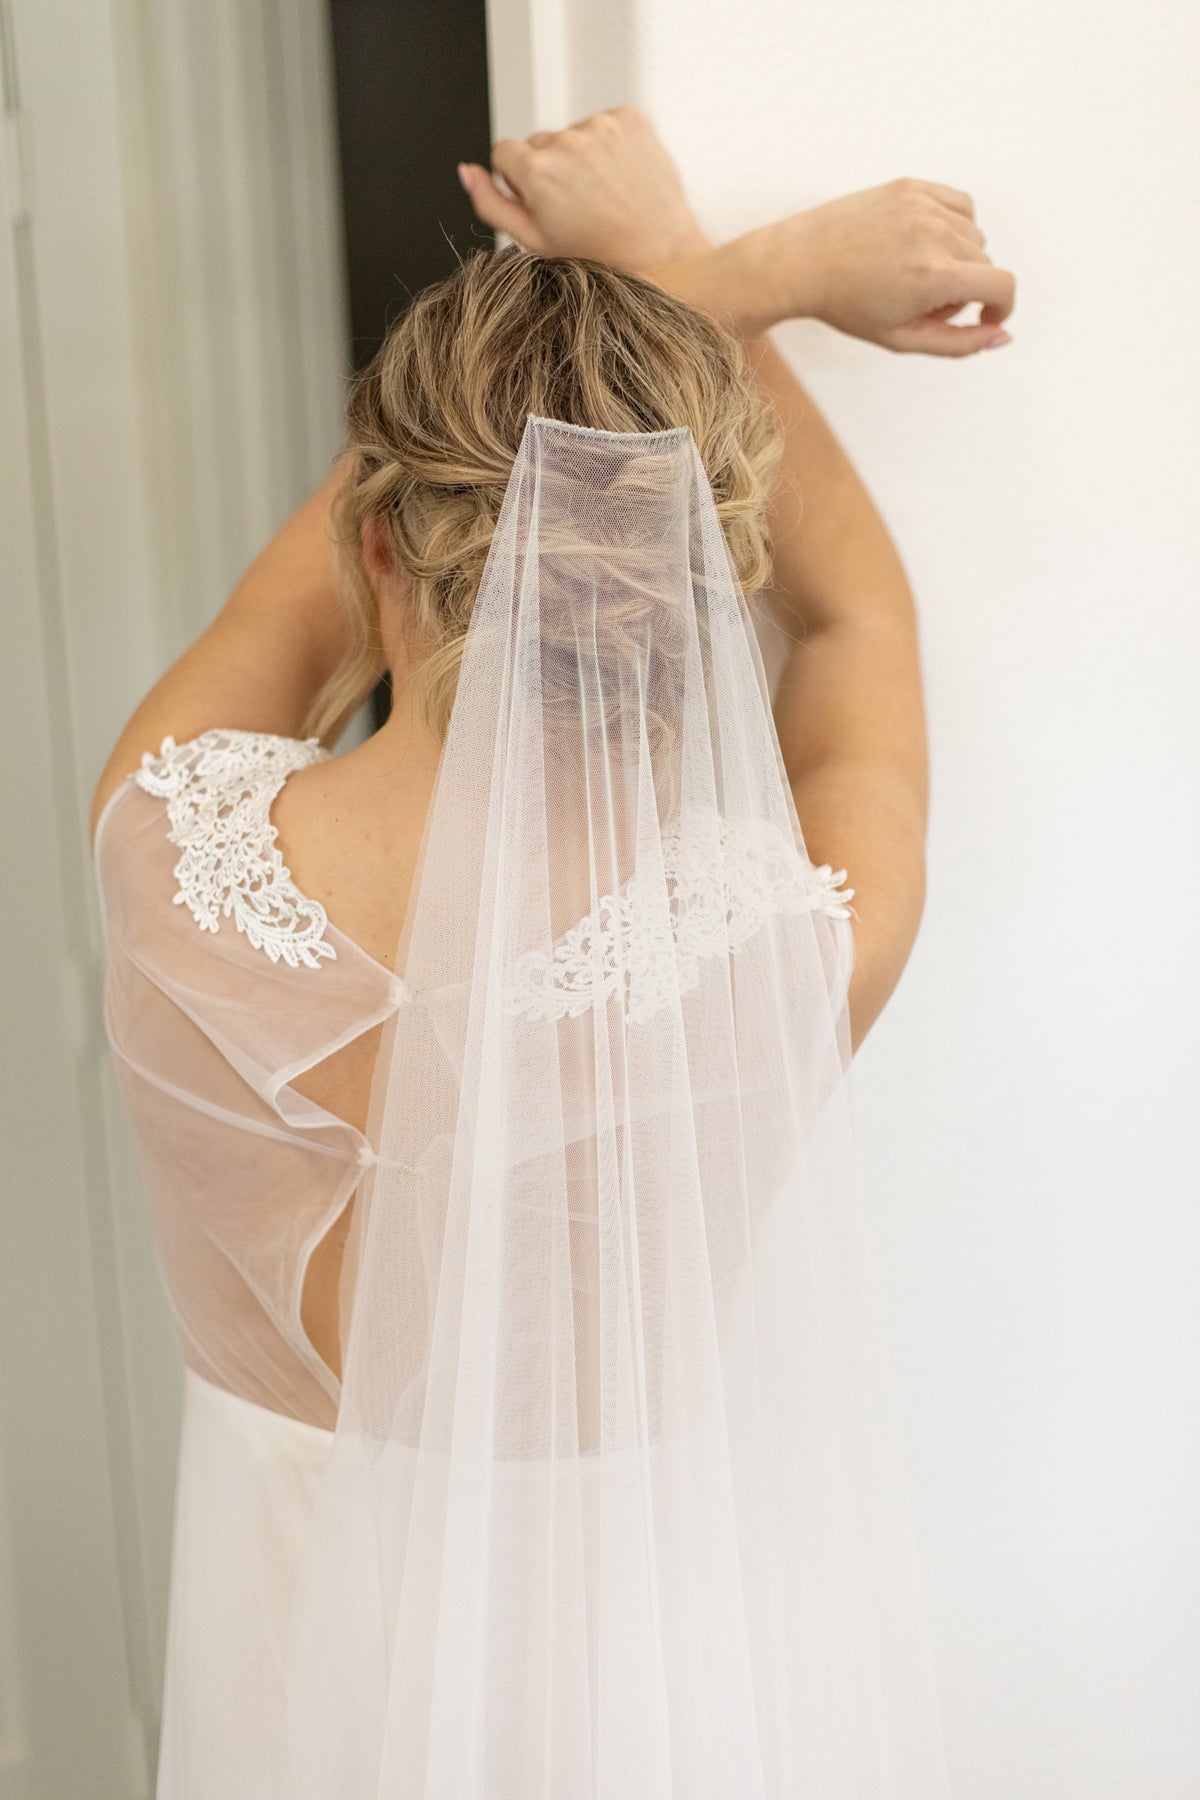 A Champagne Veil For Our Gorgeous Real Bride Rachel